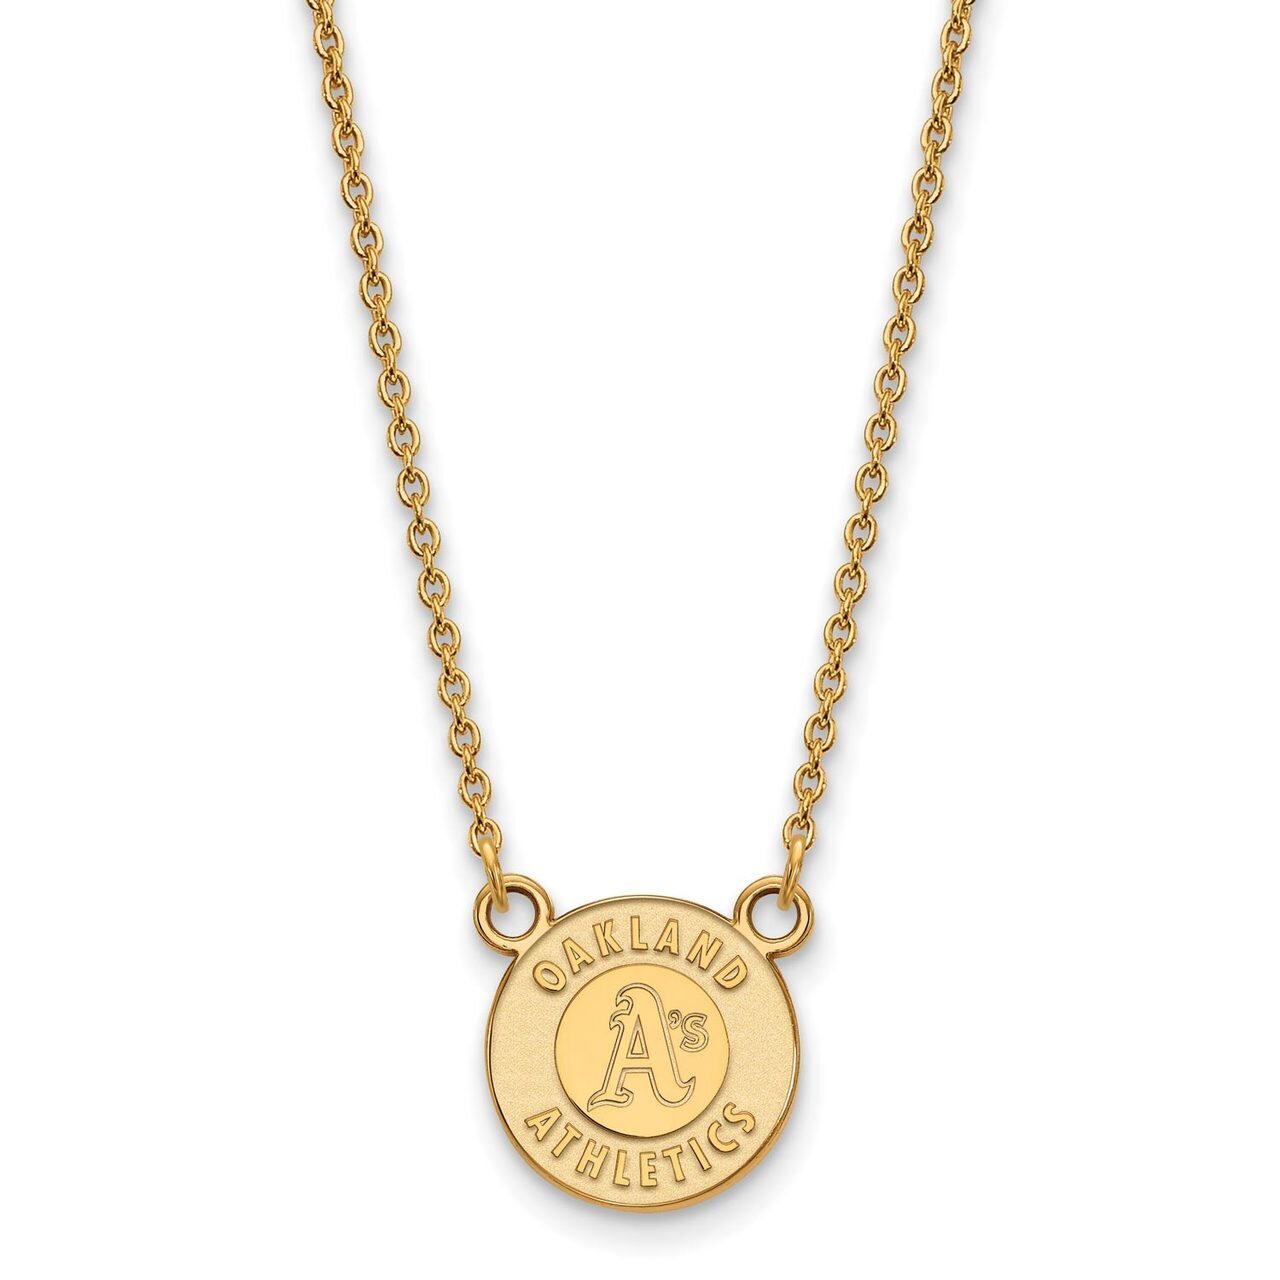 Oakland Athletics Small Pendant with Chain Necklace 10k Yellow Gold 1Y009ATH-18